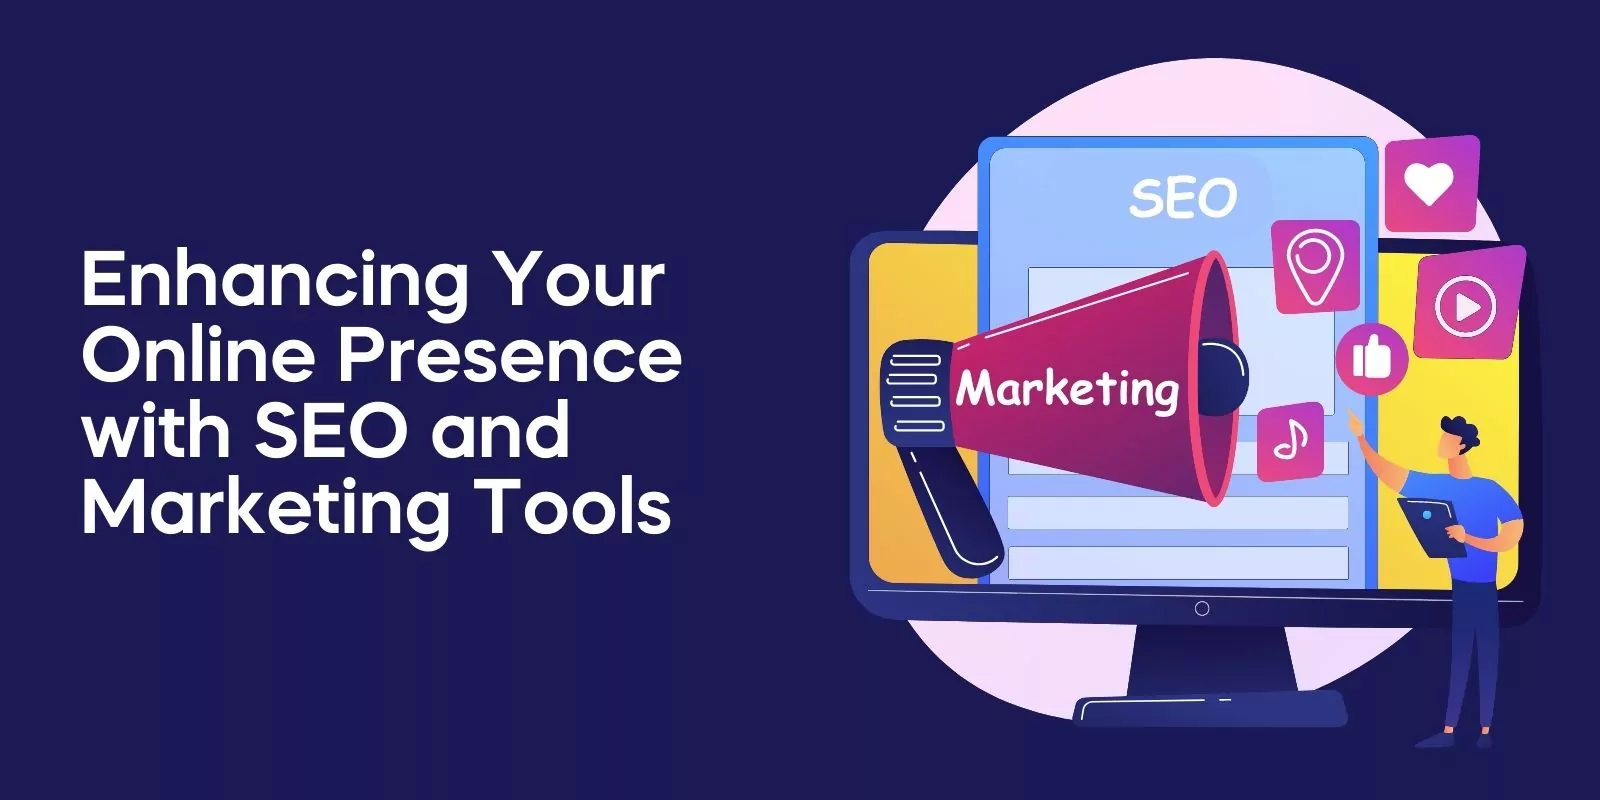 Enhancing Your Online Presence with SEO and Marketing Tools